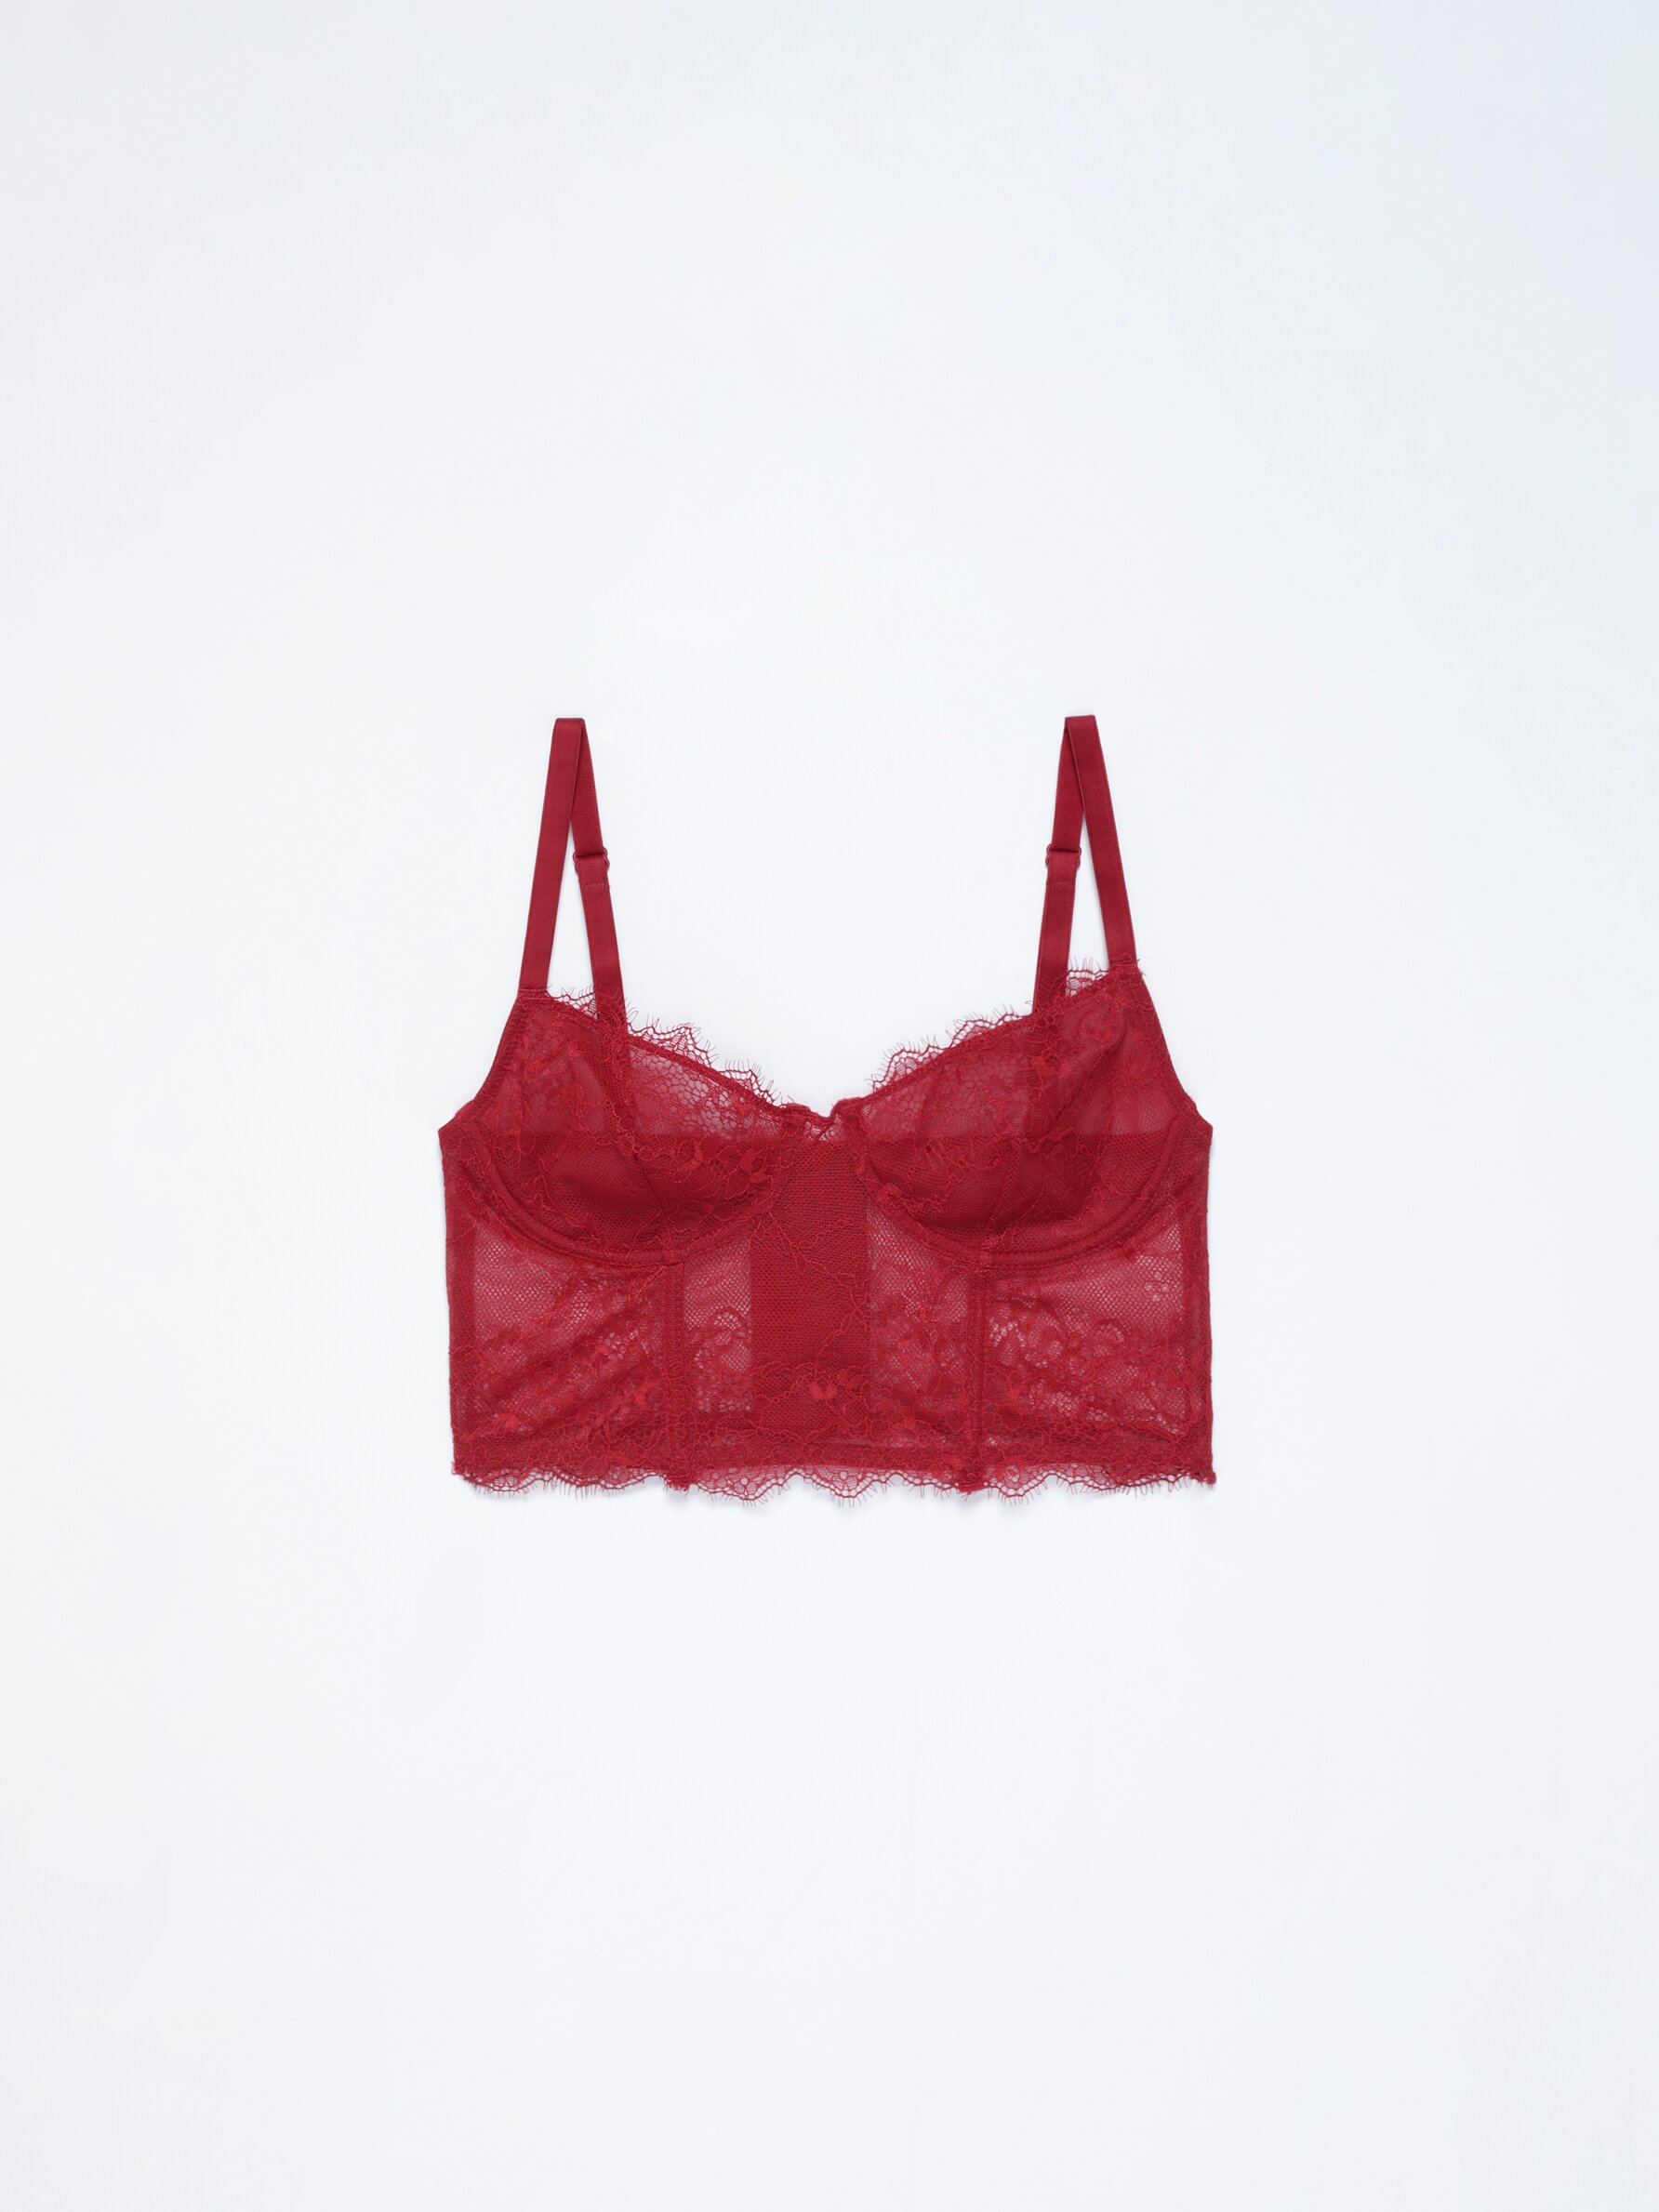 Lace camisole top - Bras - Underwear - CLOTHING - Woman